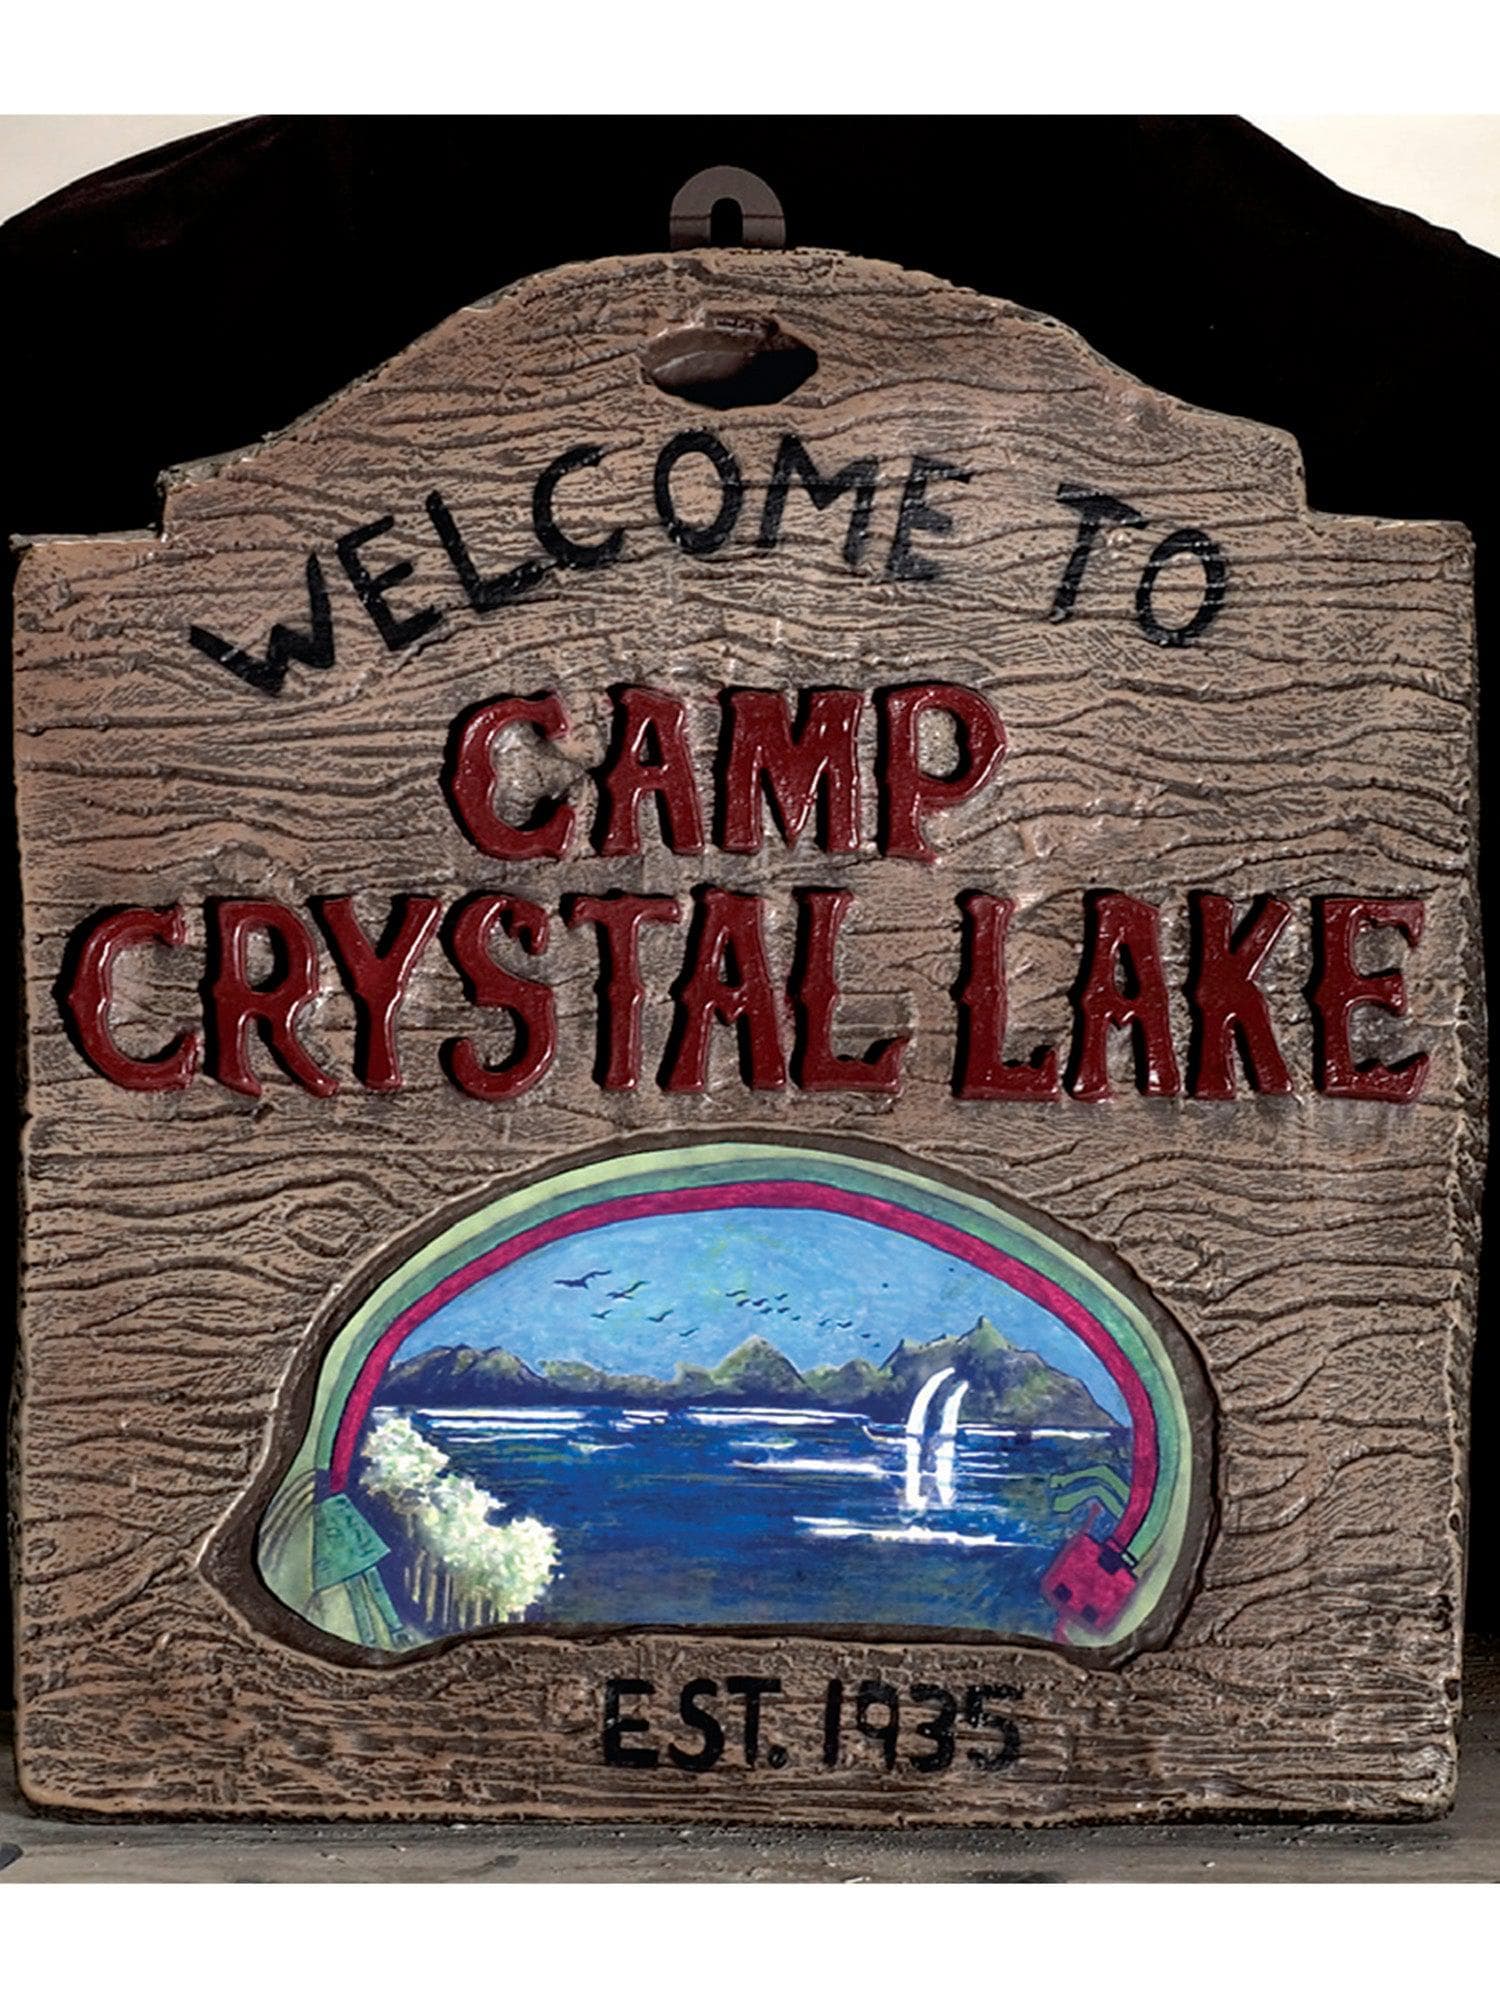 17-inch Friday the 13th Camp Crystal Lake Wall Decoration - costumes.com